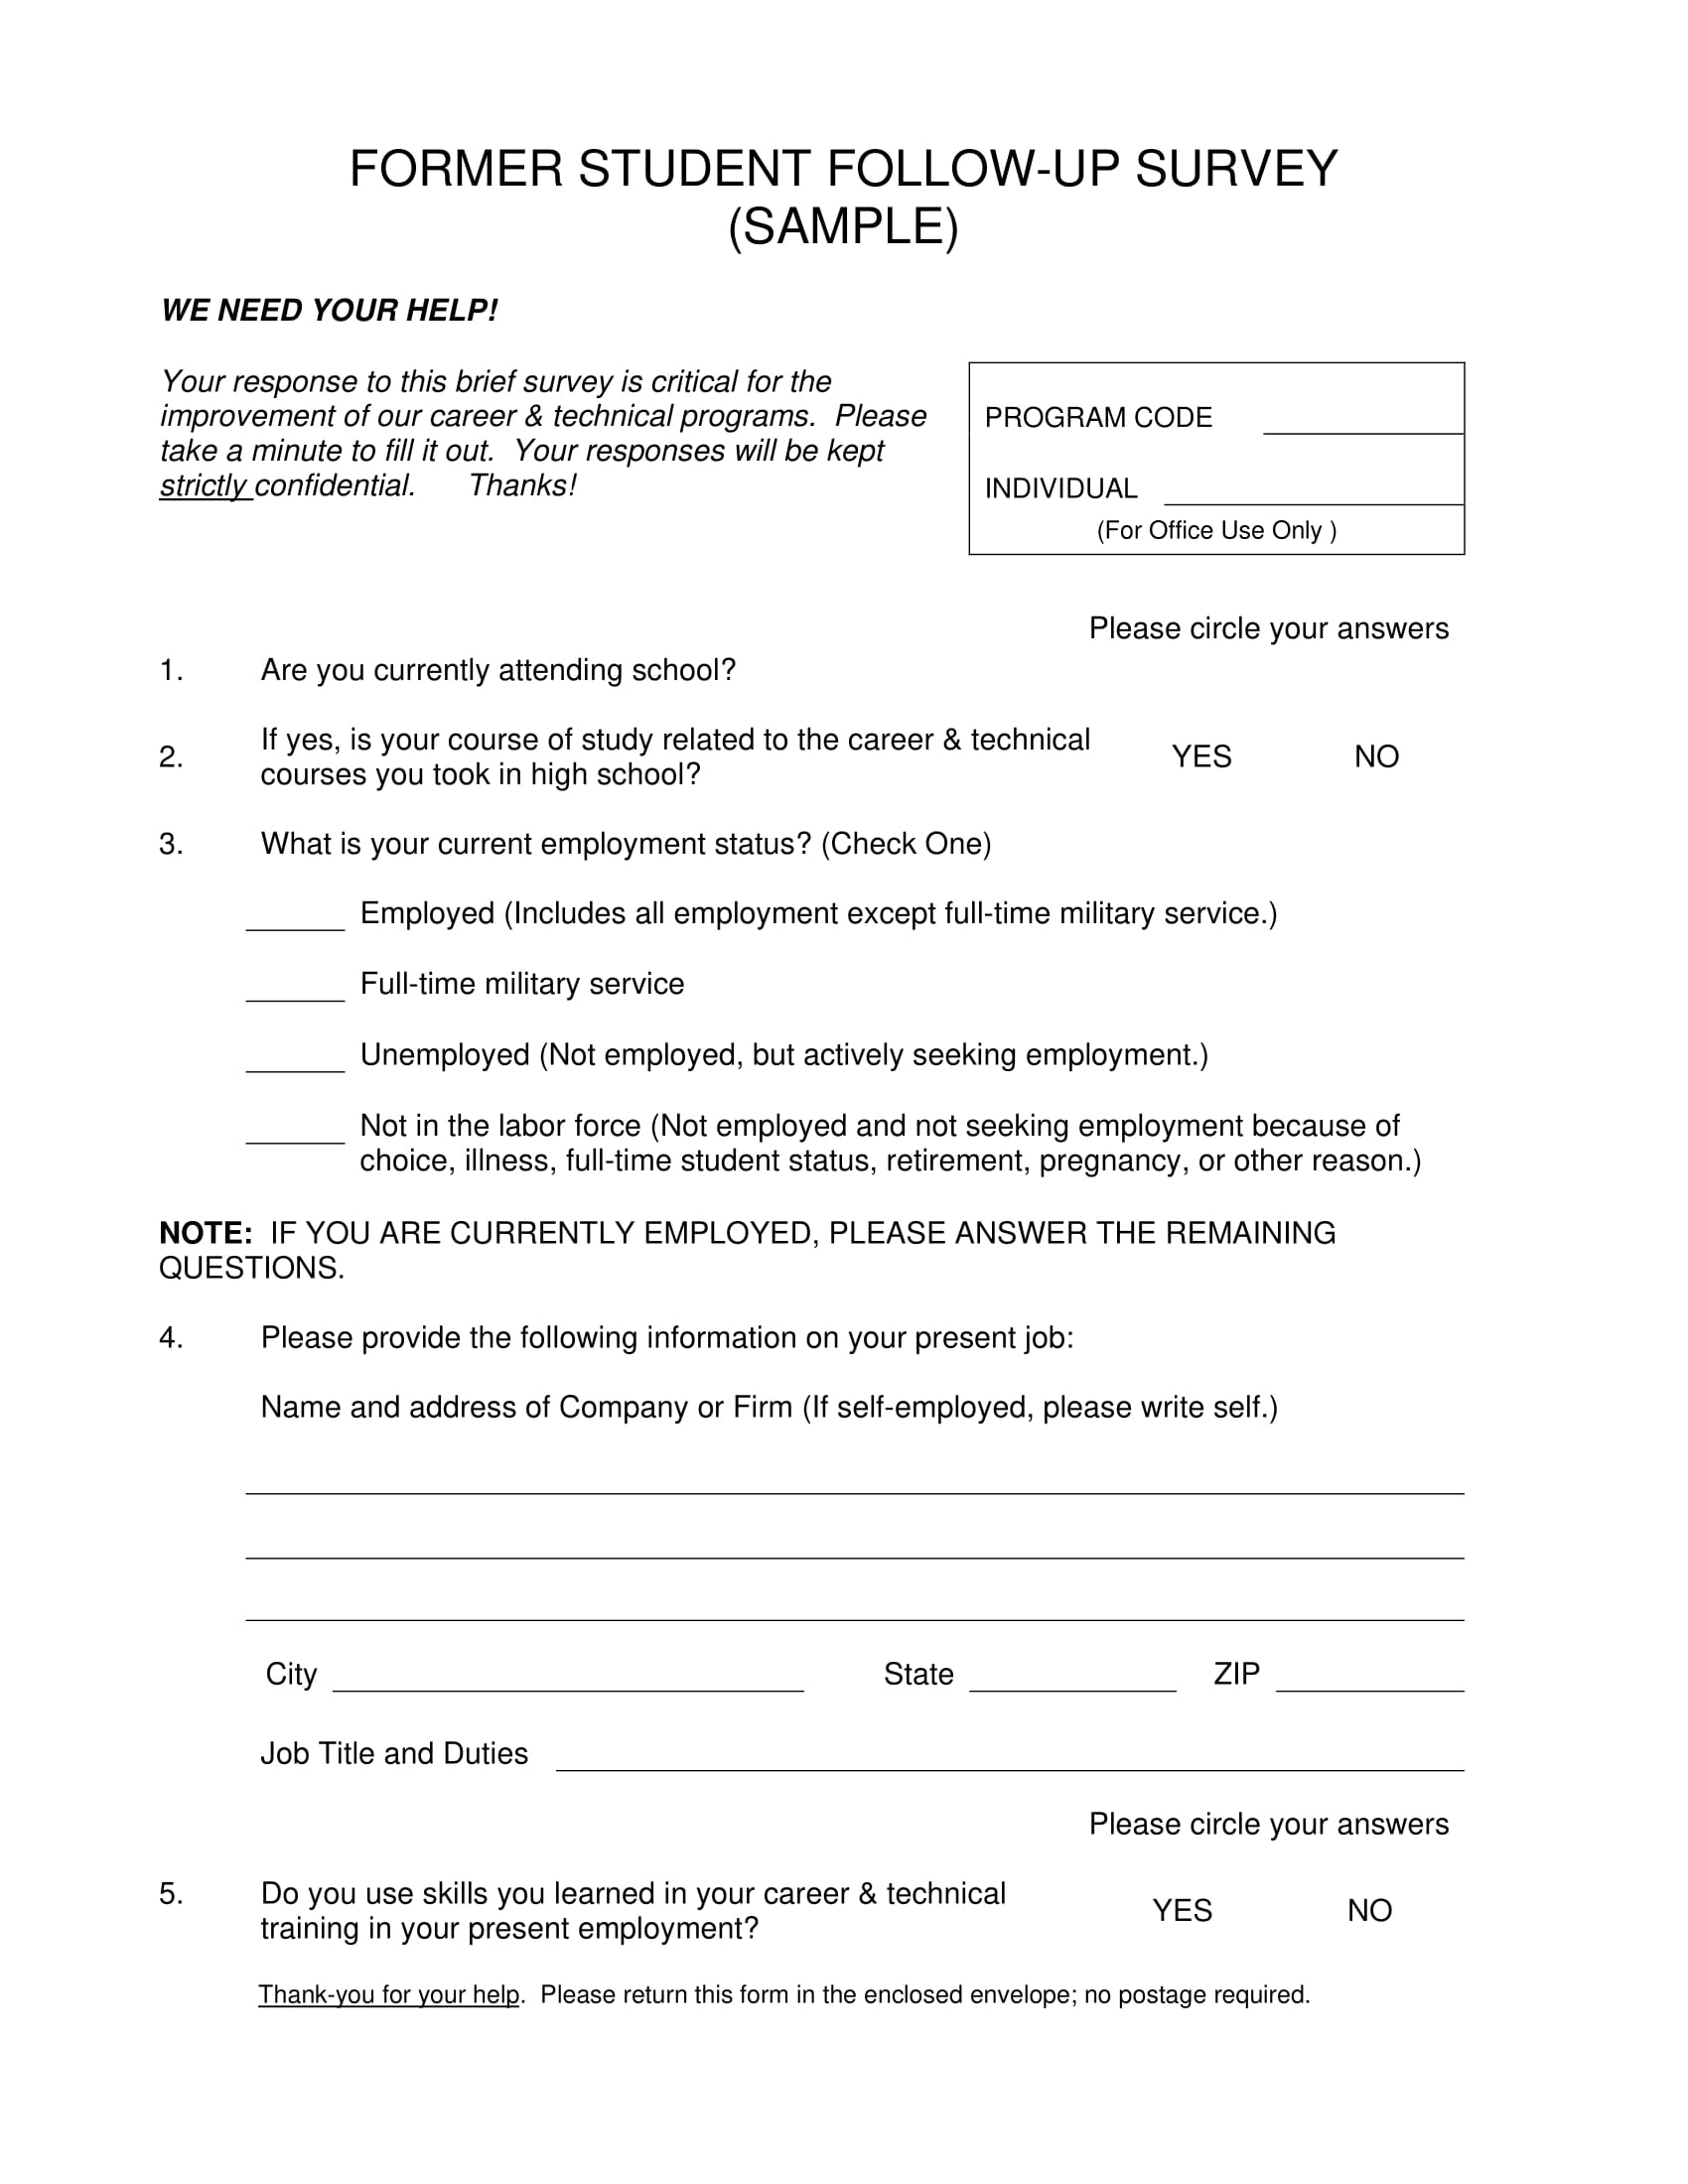 former student follow up survey form 1